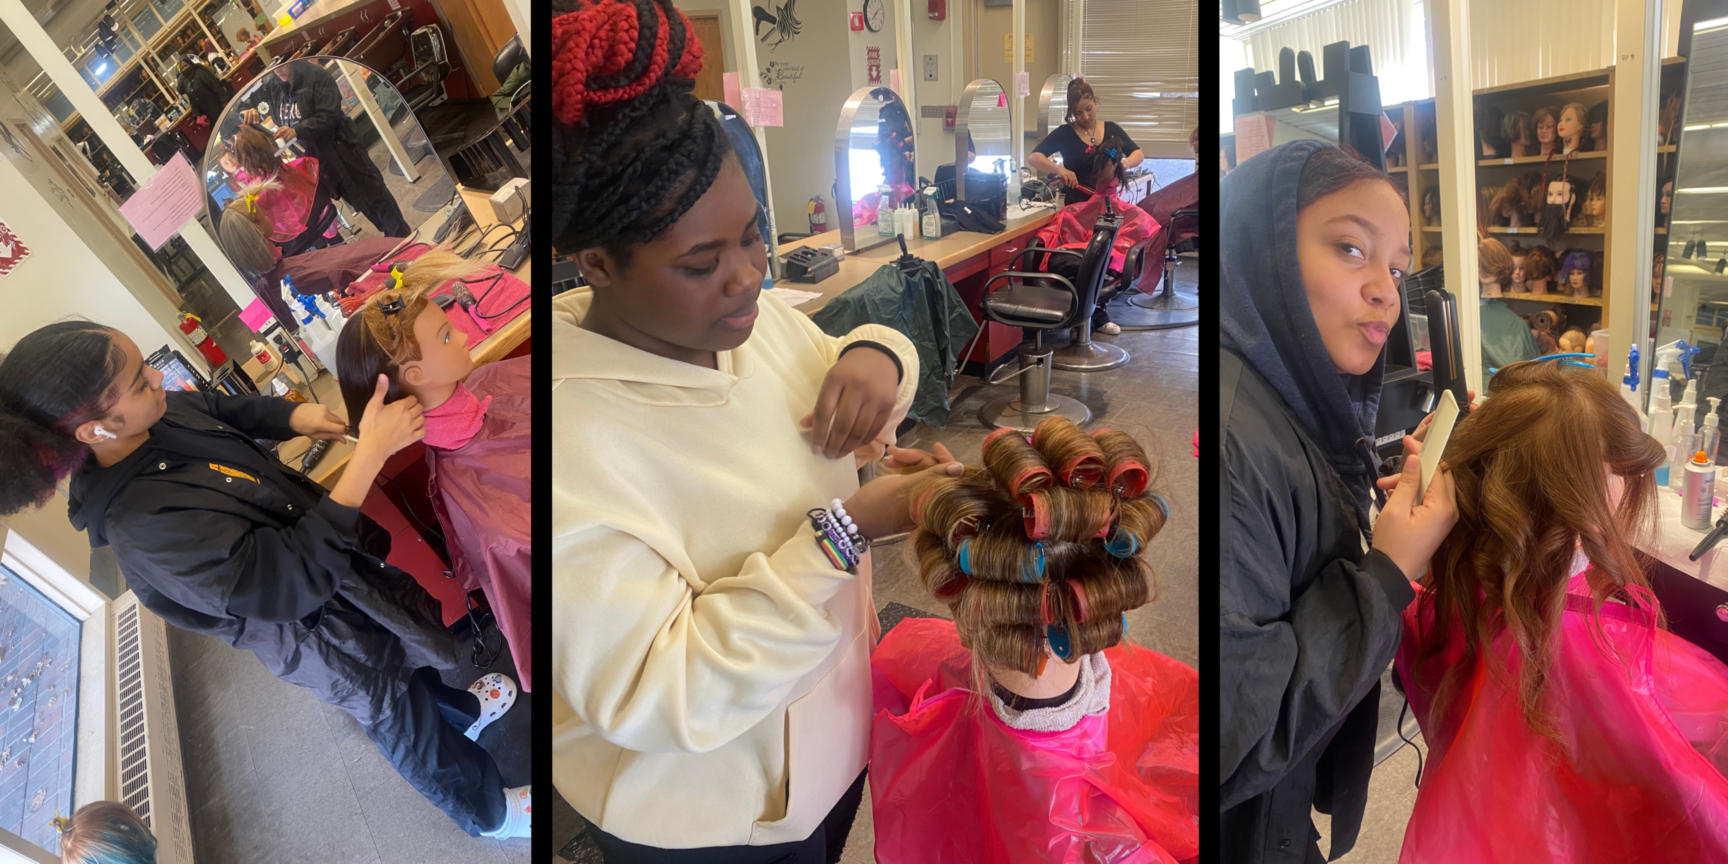 MP Cosmetology students practice styling curly hair